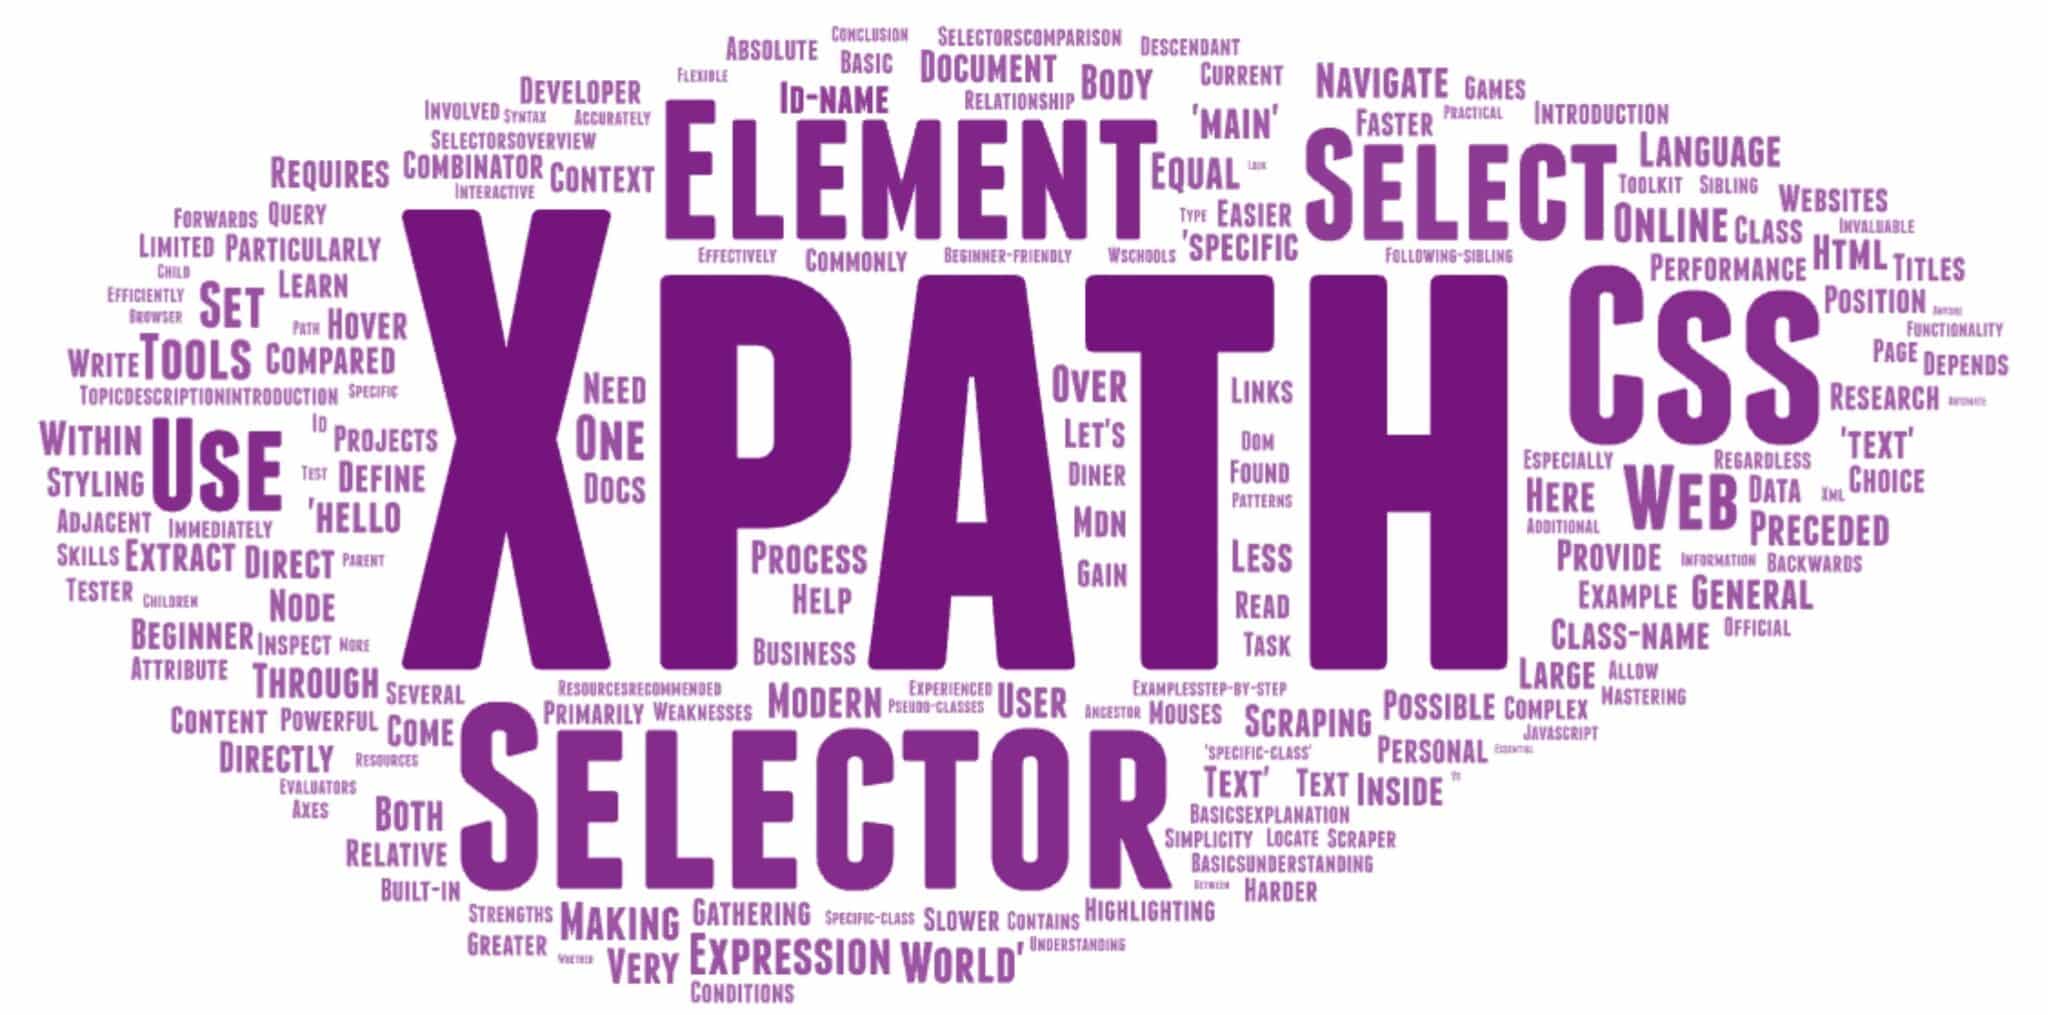 Mastering XPath and CSS Selectors: What Are They and How to Use Them for Web Scraping?